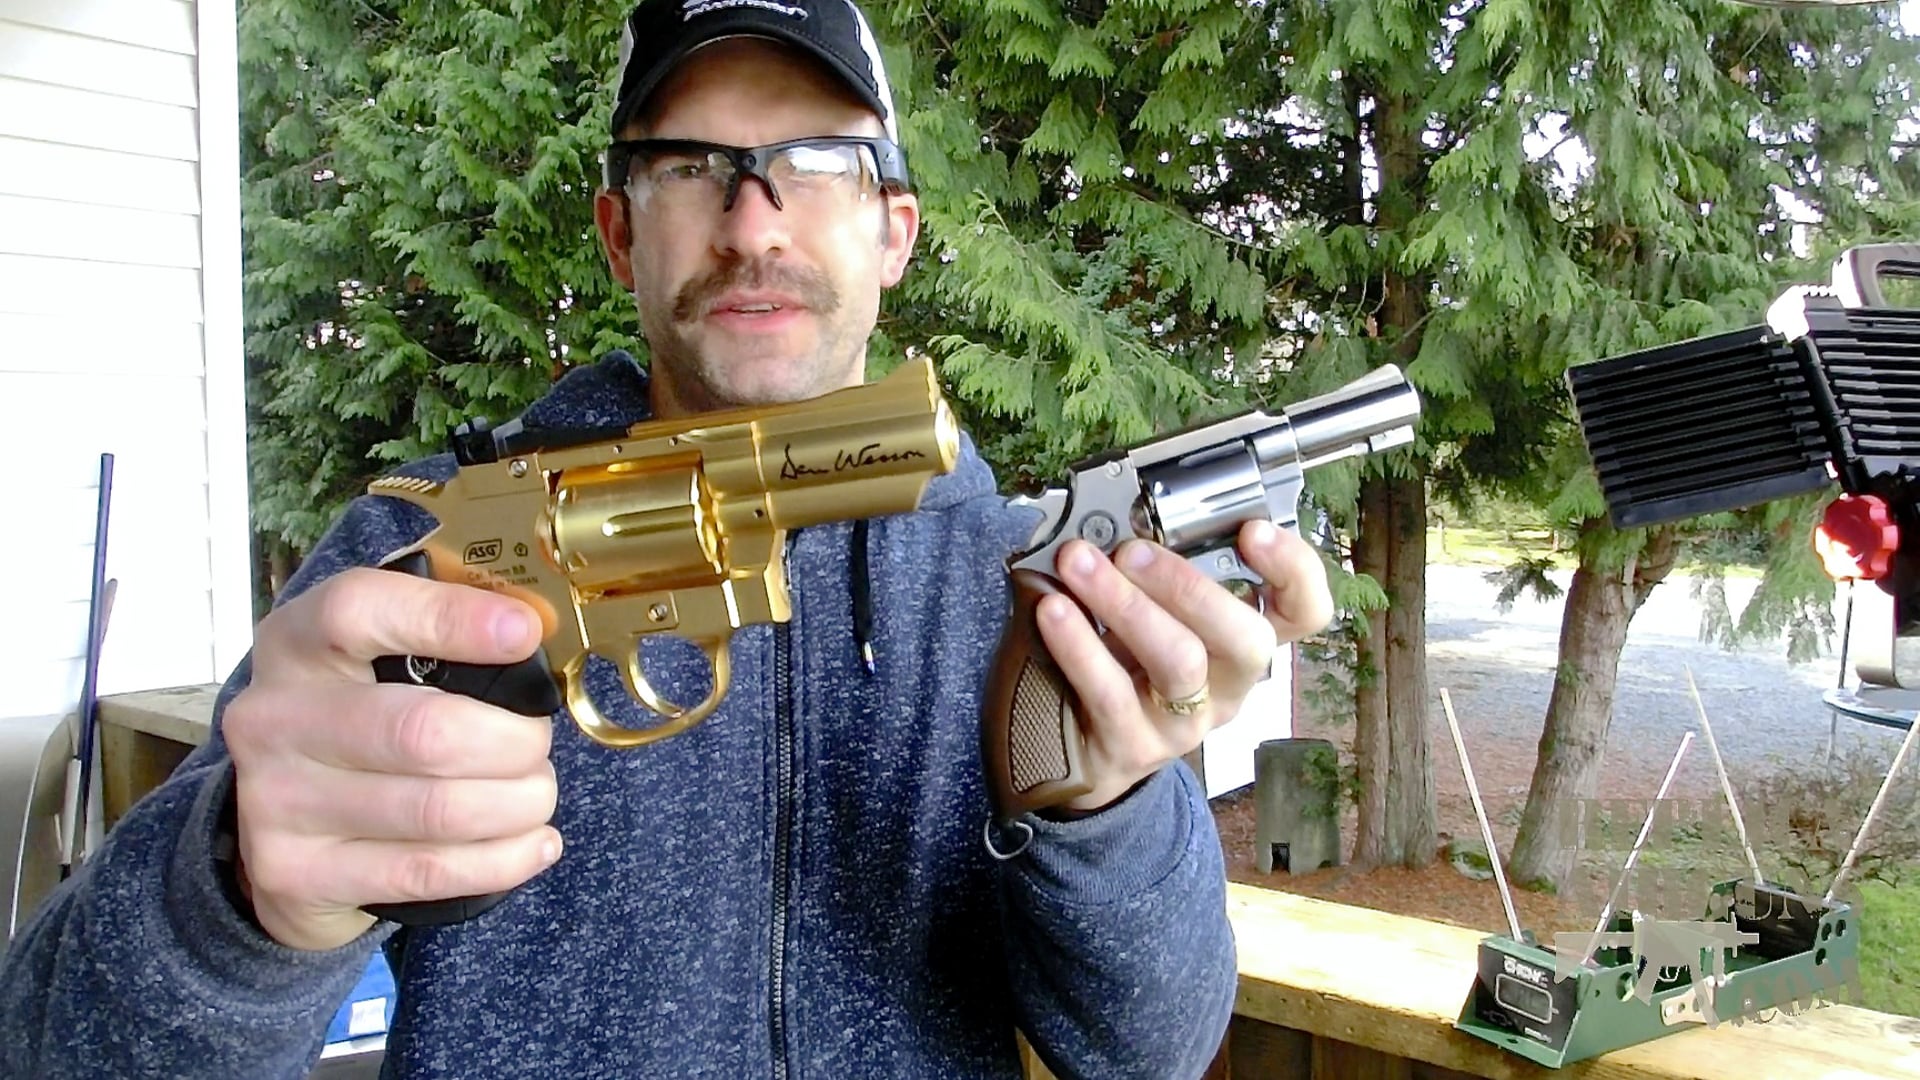 ASG Dan Wesson 2.5 inch Gold - G&G G731 2.5 Airsoft Pistol Field Test Shooting Comparison